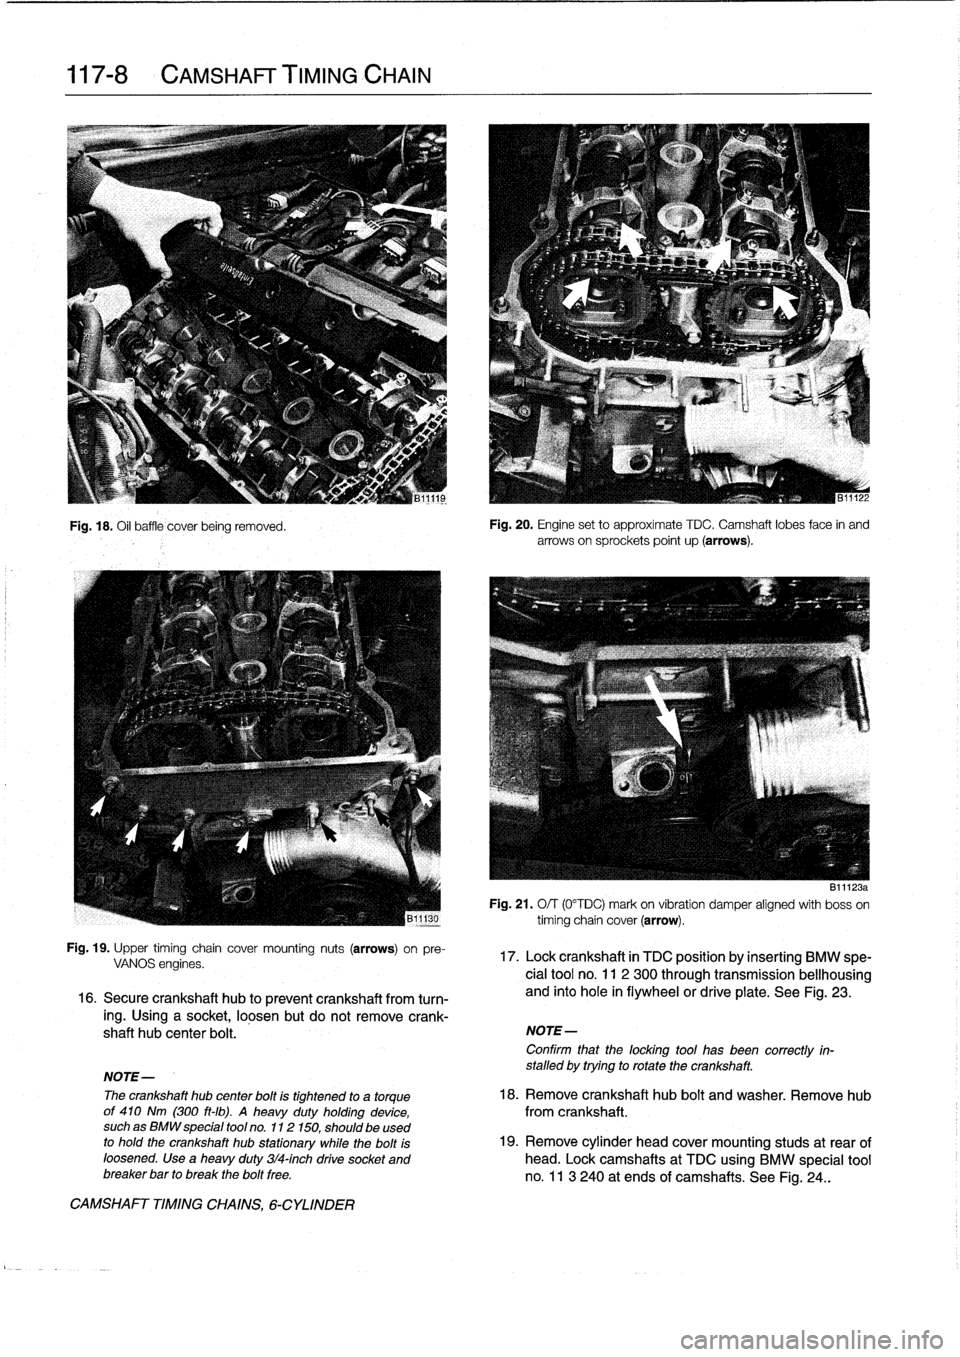 BMW 328i 1997 E36 Workshop Manual 
117-
8

	

CAMSHAFT
TIMING
CHAIN

Fig
.
18
.
Oil
baffle
cover
being
removed
.

Fig
.
19
.
Upper
timing
chaincover
mounting
nuts
(arrows)
on
pre-
VANOS
engines
.

16
.
Secure
crankshaft
hub
to
preven